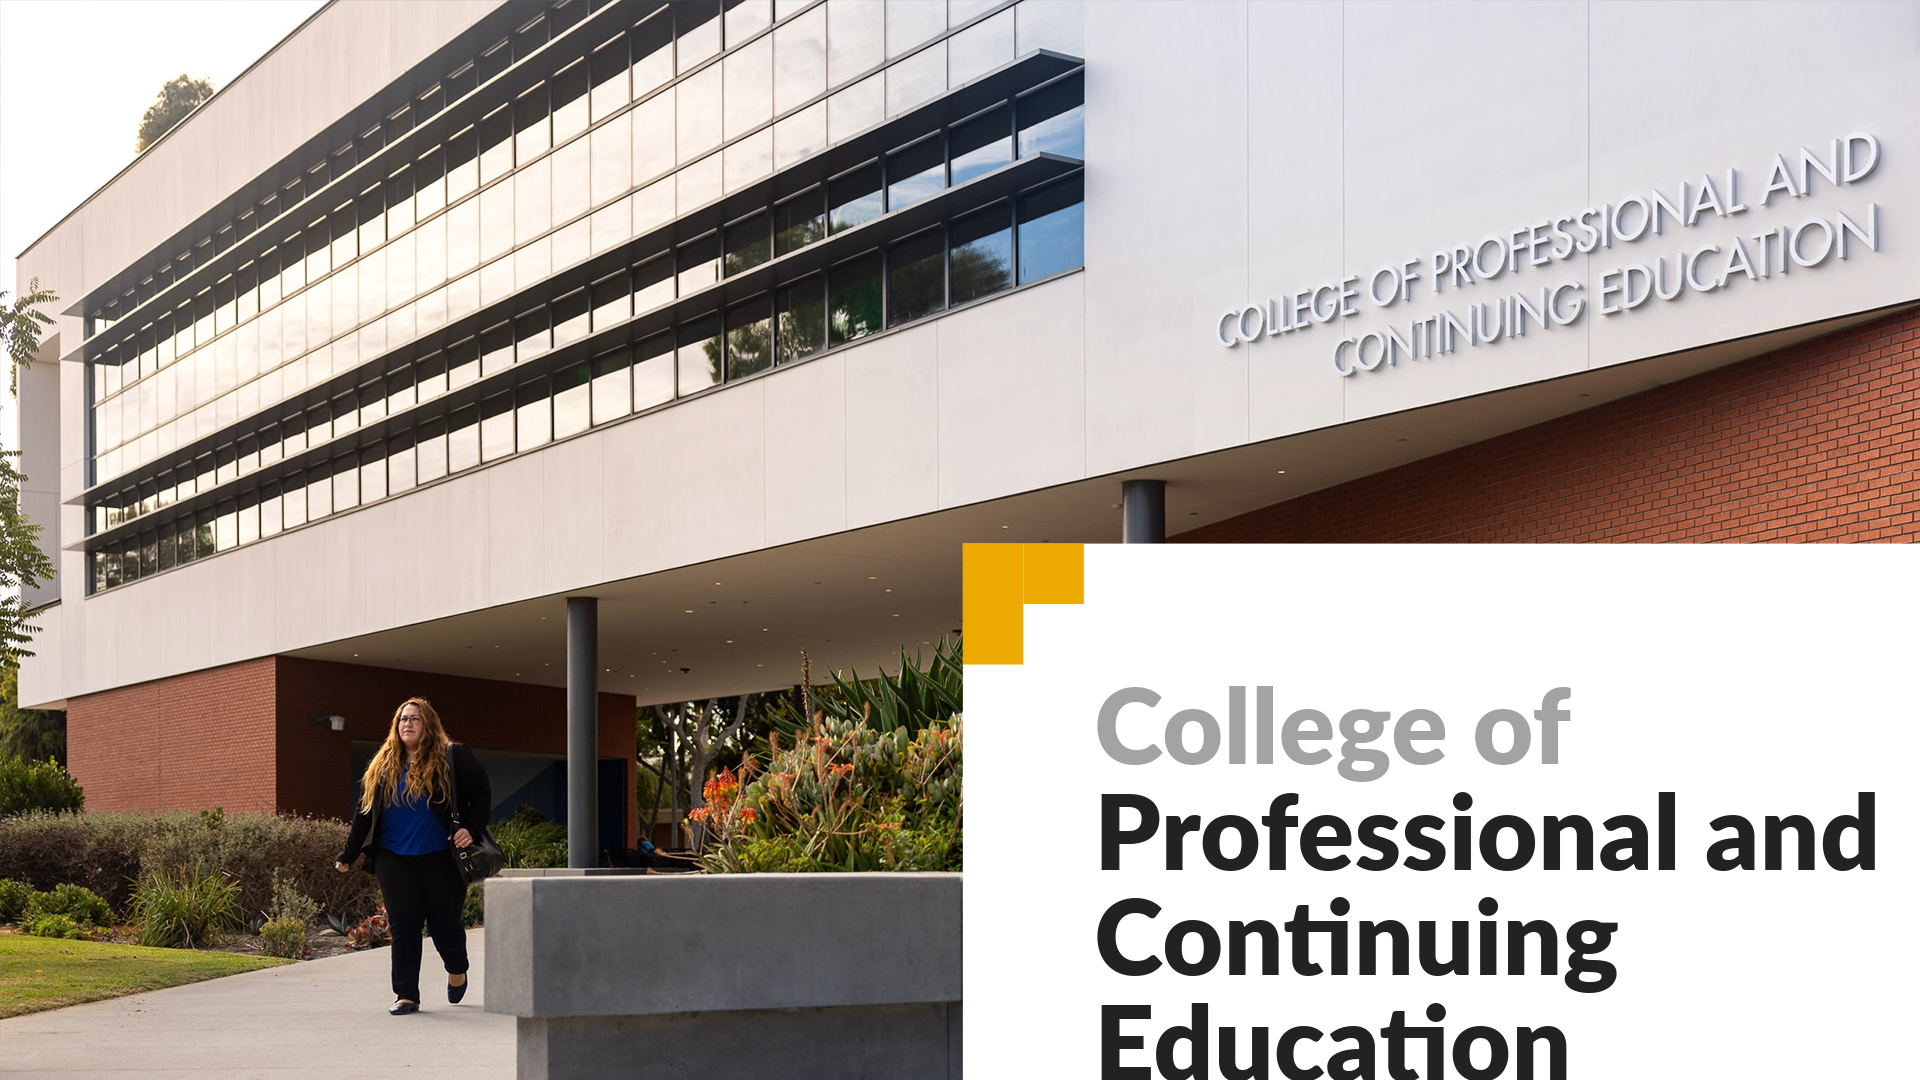 College of Professional and Continuing Education. Image shows a woman walking in front of the College of Professional and Continuing Education building. 